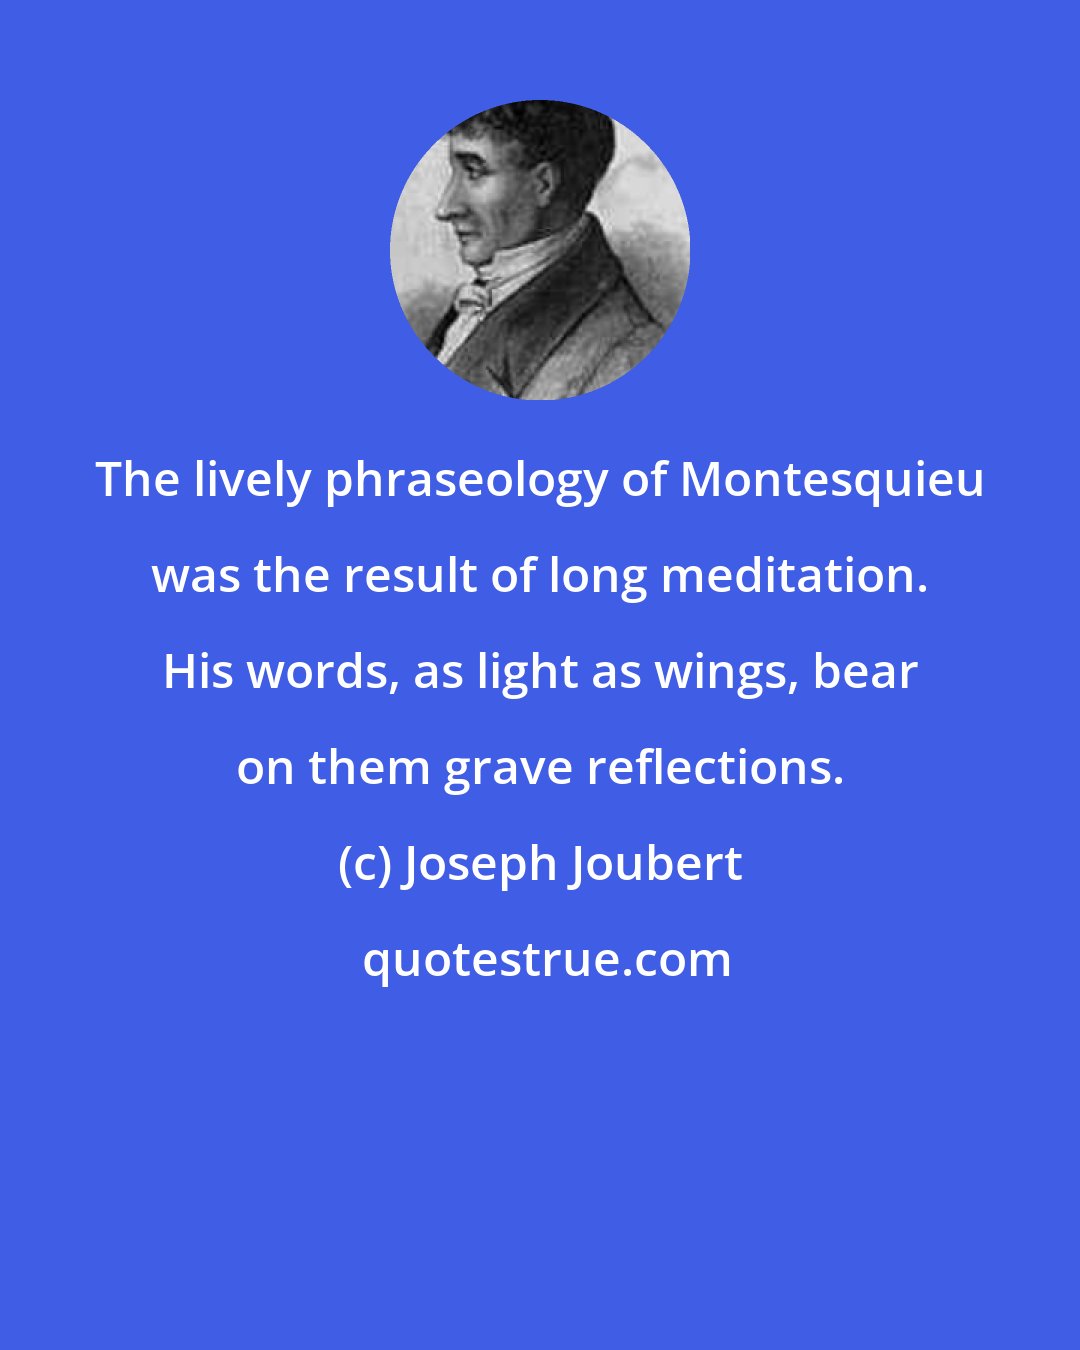 Joseph Joubert: The lively phraseology of Montesquieu was the result of long meditation. His words, as light as wings, bear on them grave reflections.